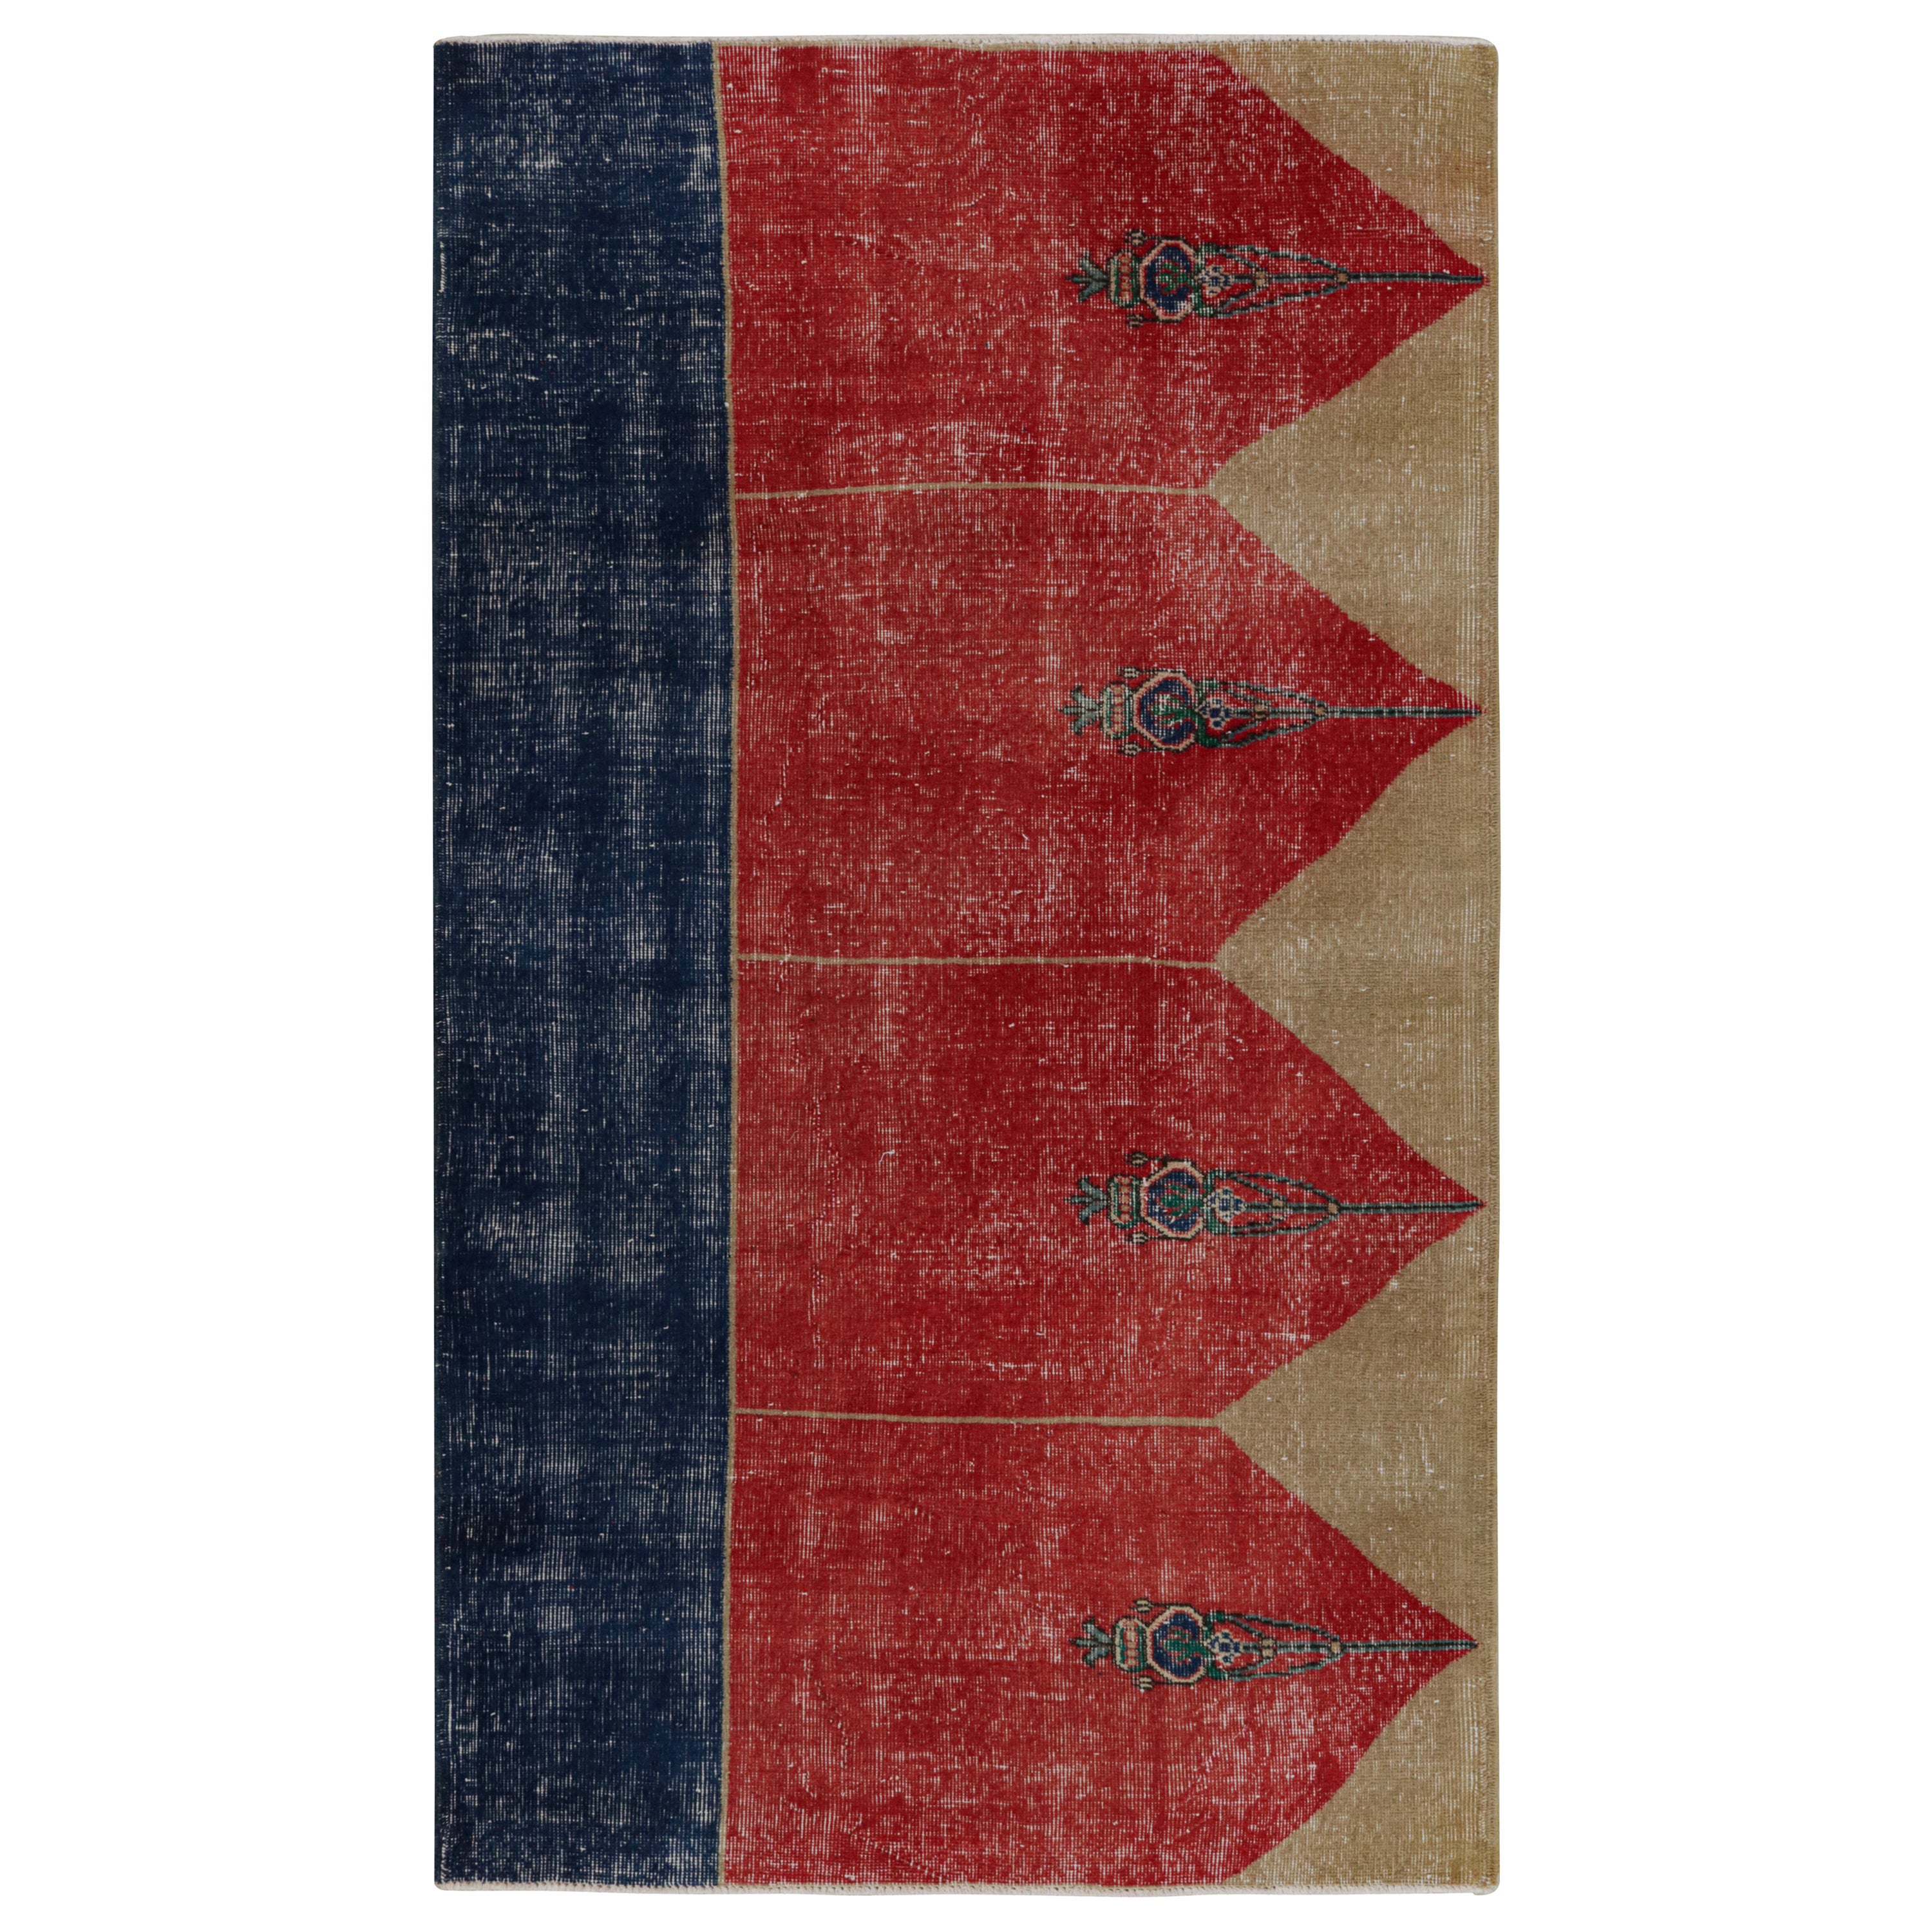 Vintage Turkish Rug in Red, with Geometric Patterns, from Rug & Kilim